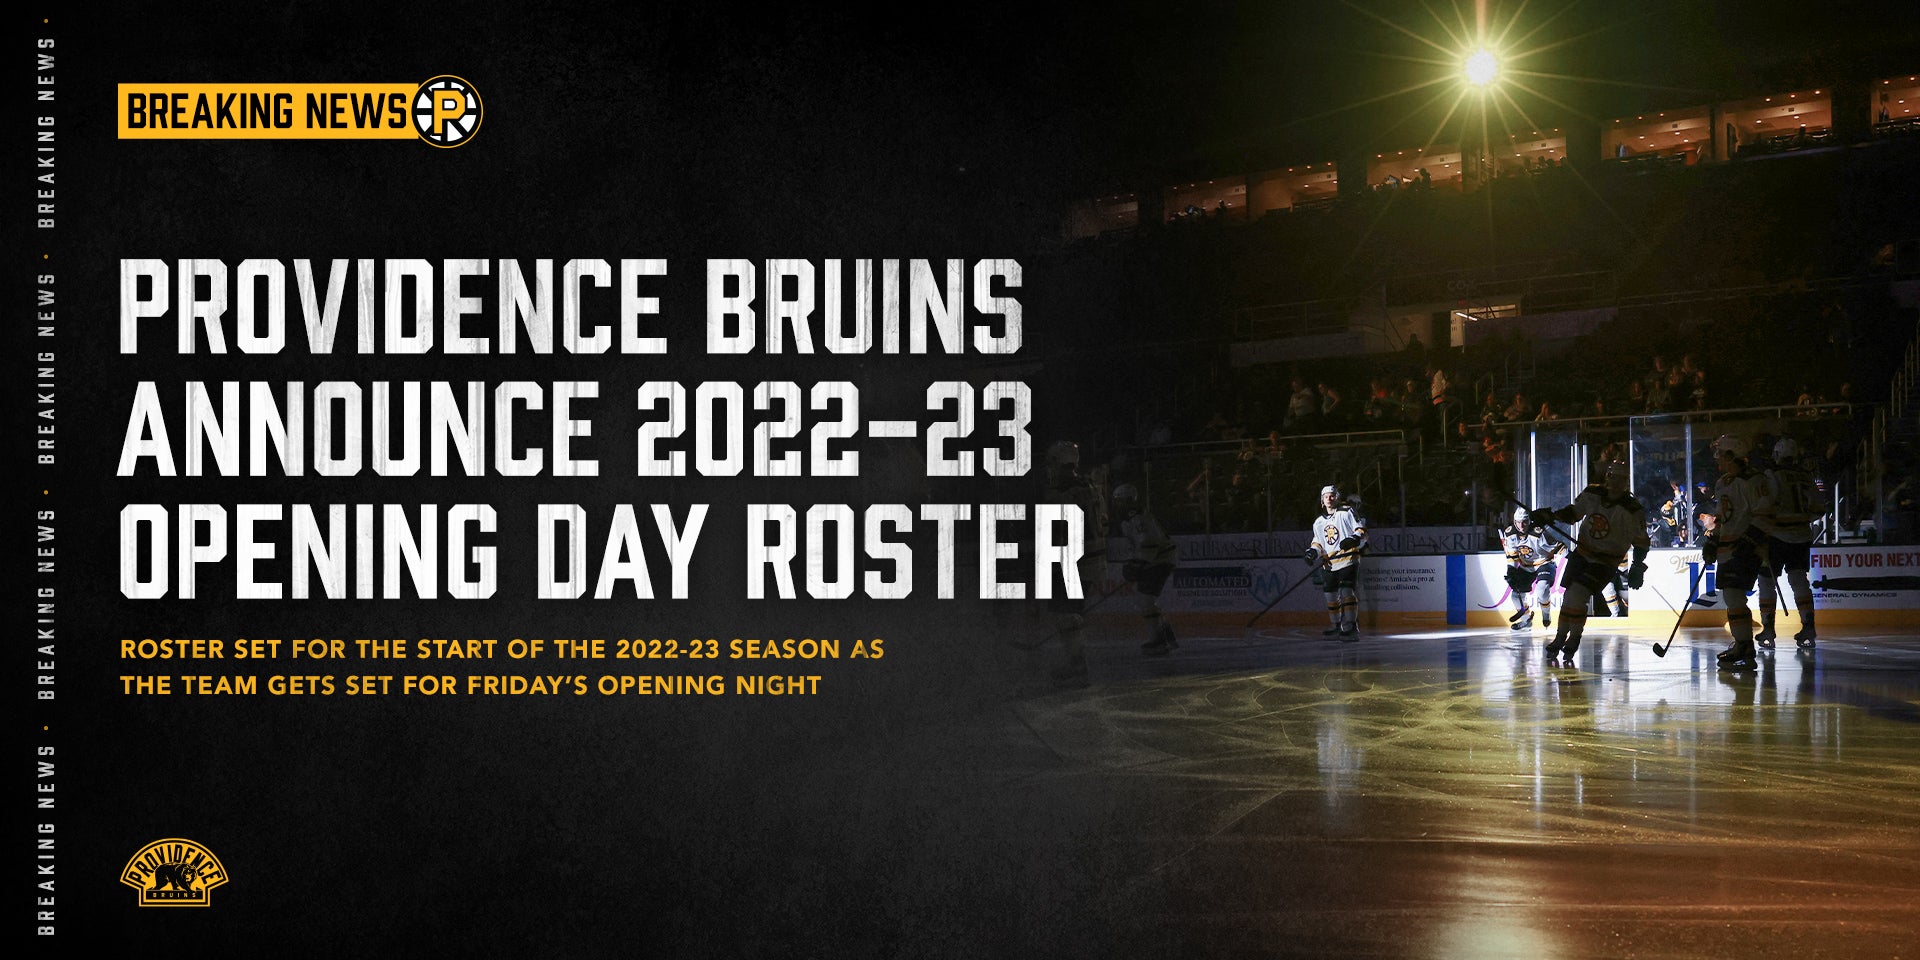 PROVIDENCE BRUINS ANNOUNCE 2021-22 OPENING DAY ROSTER